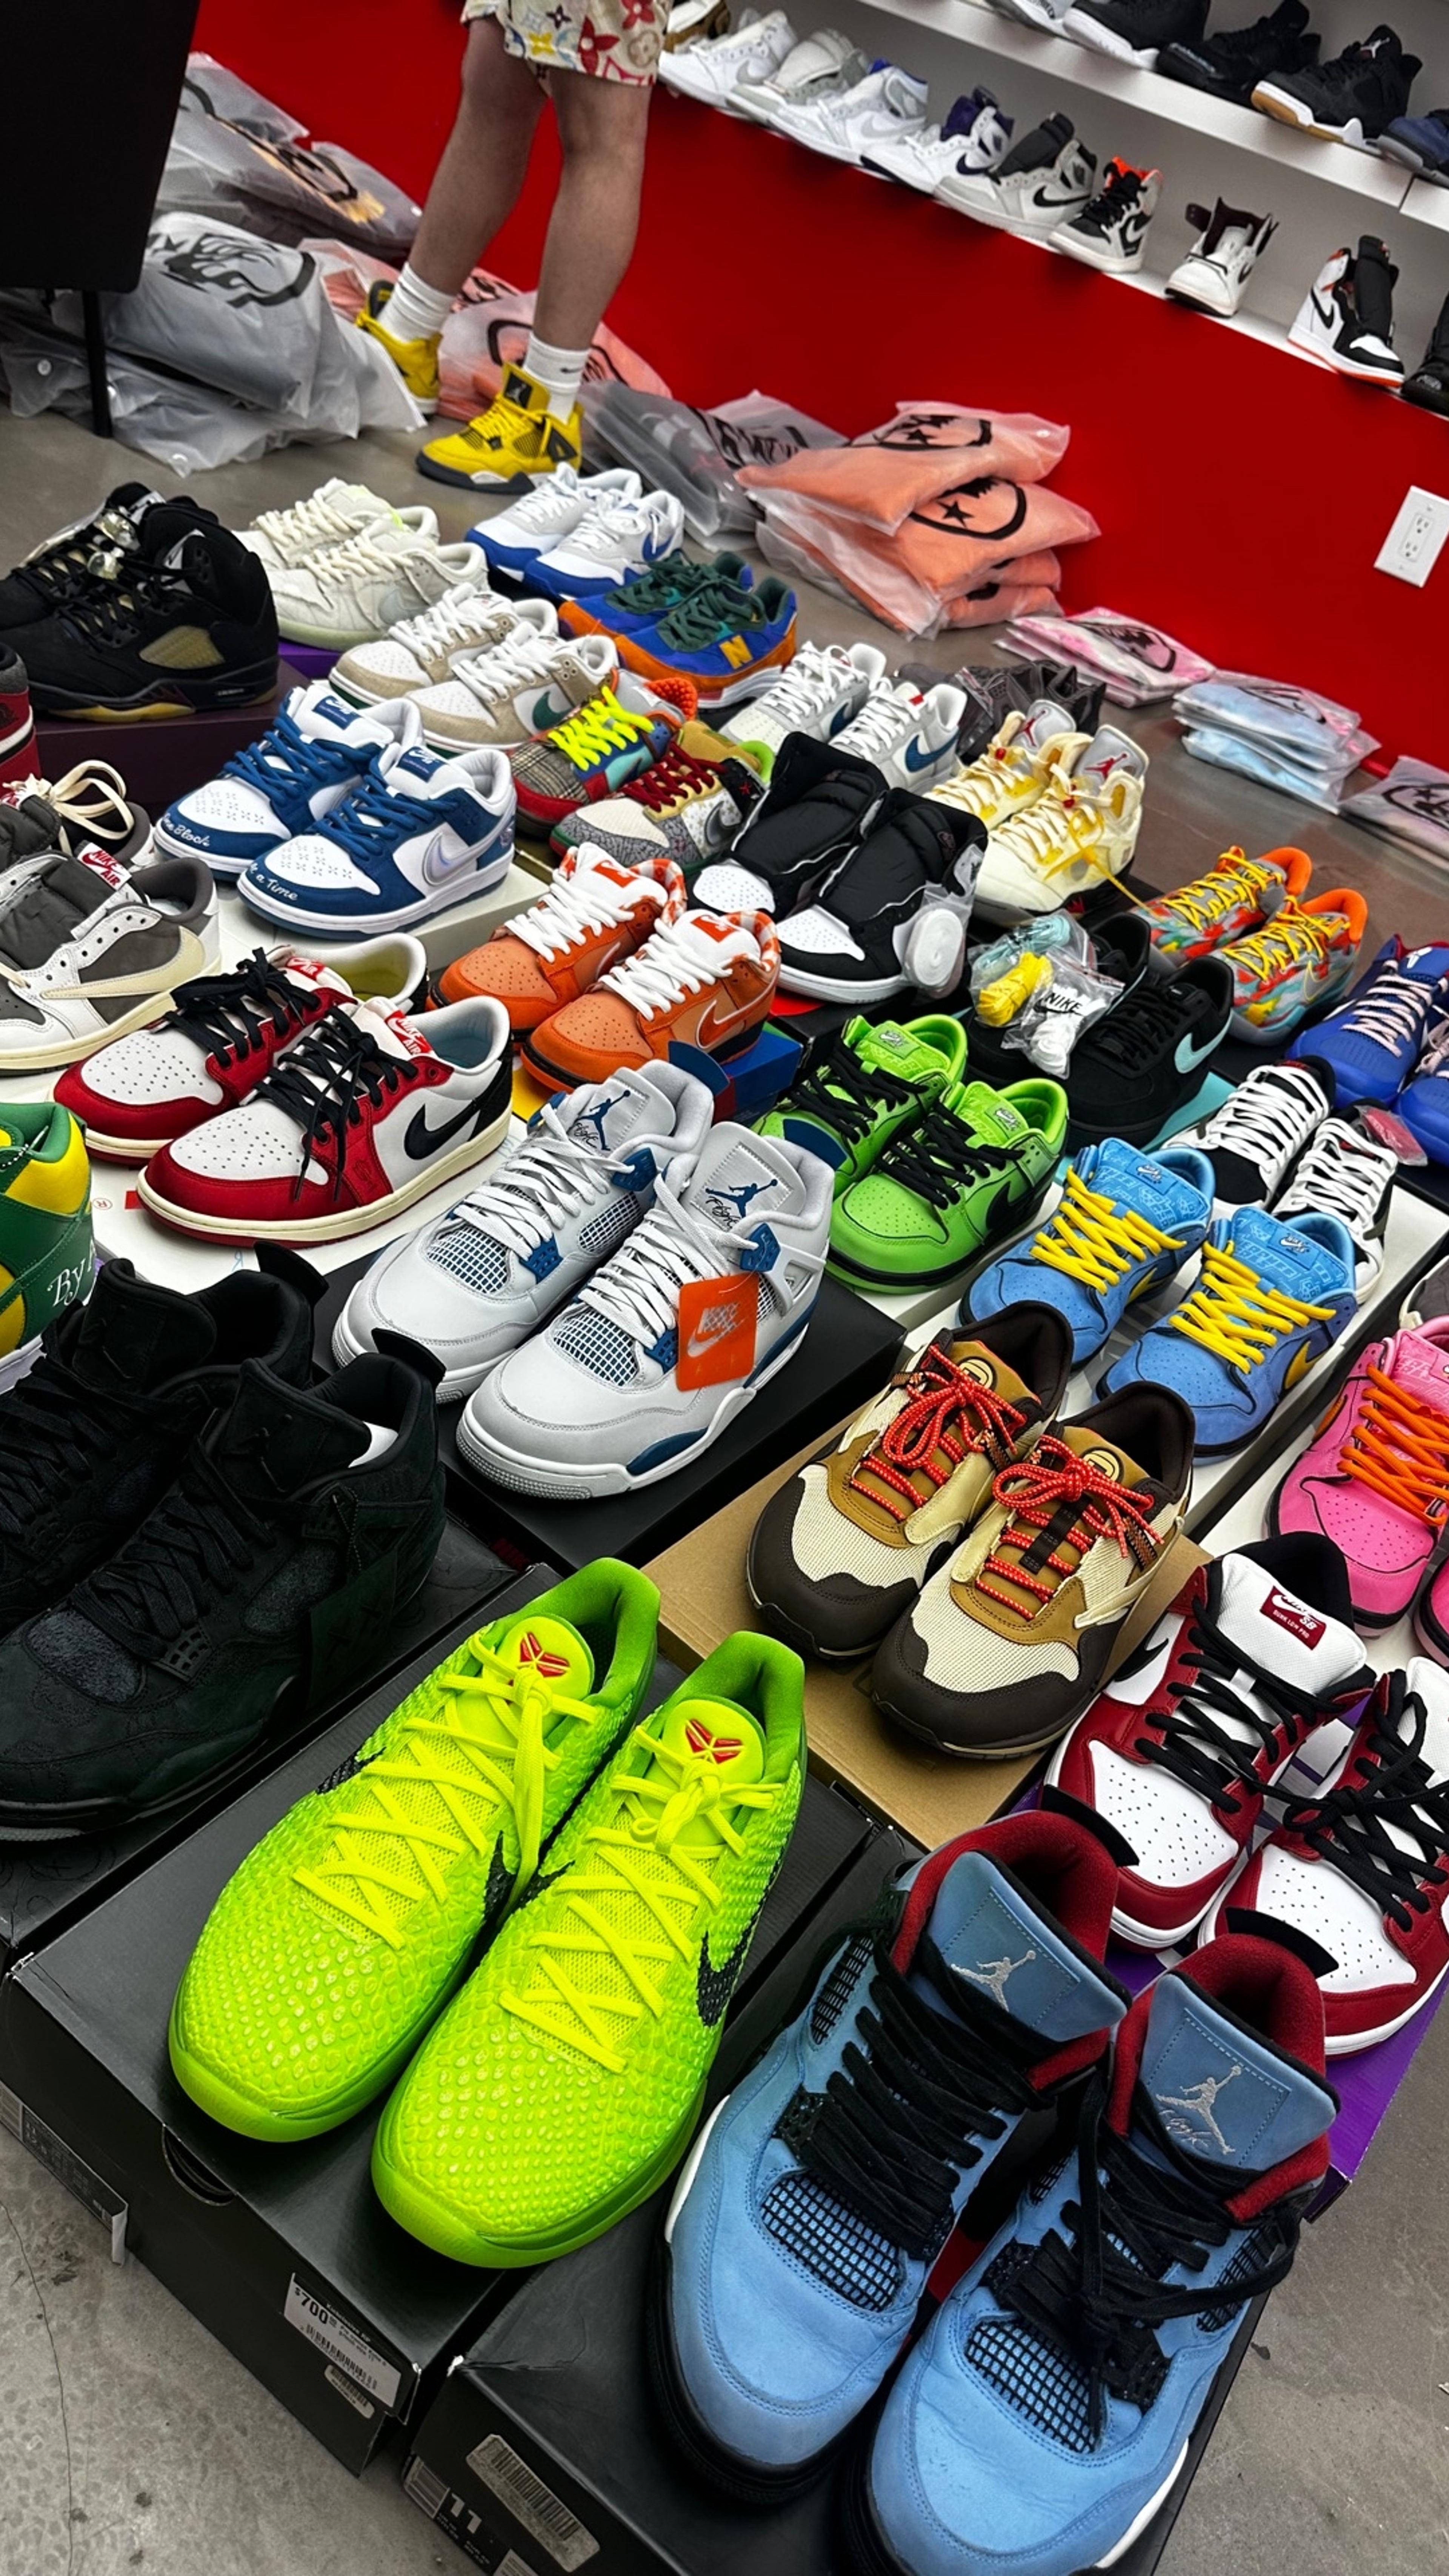 Preview image for the show titled "Quick Sneakers $1 auctions! EVERYTHING MUST GO! " at Today @ 11:00 PM